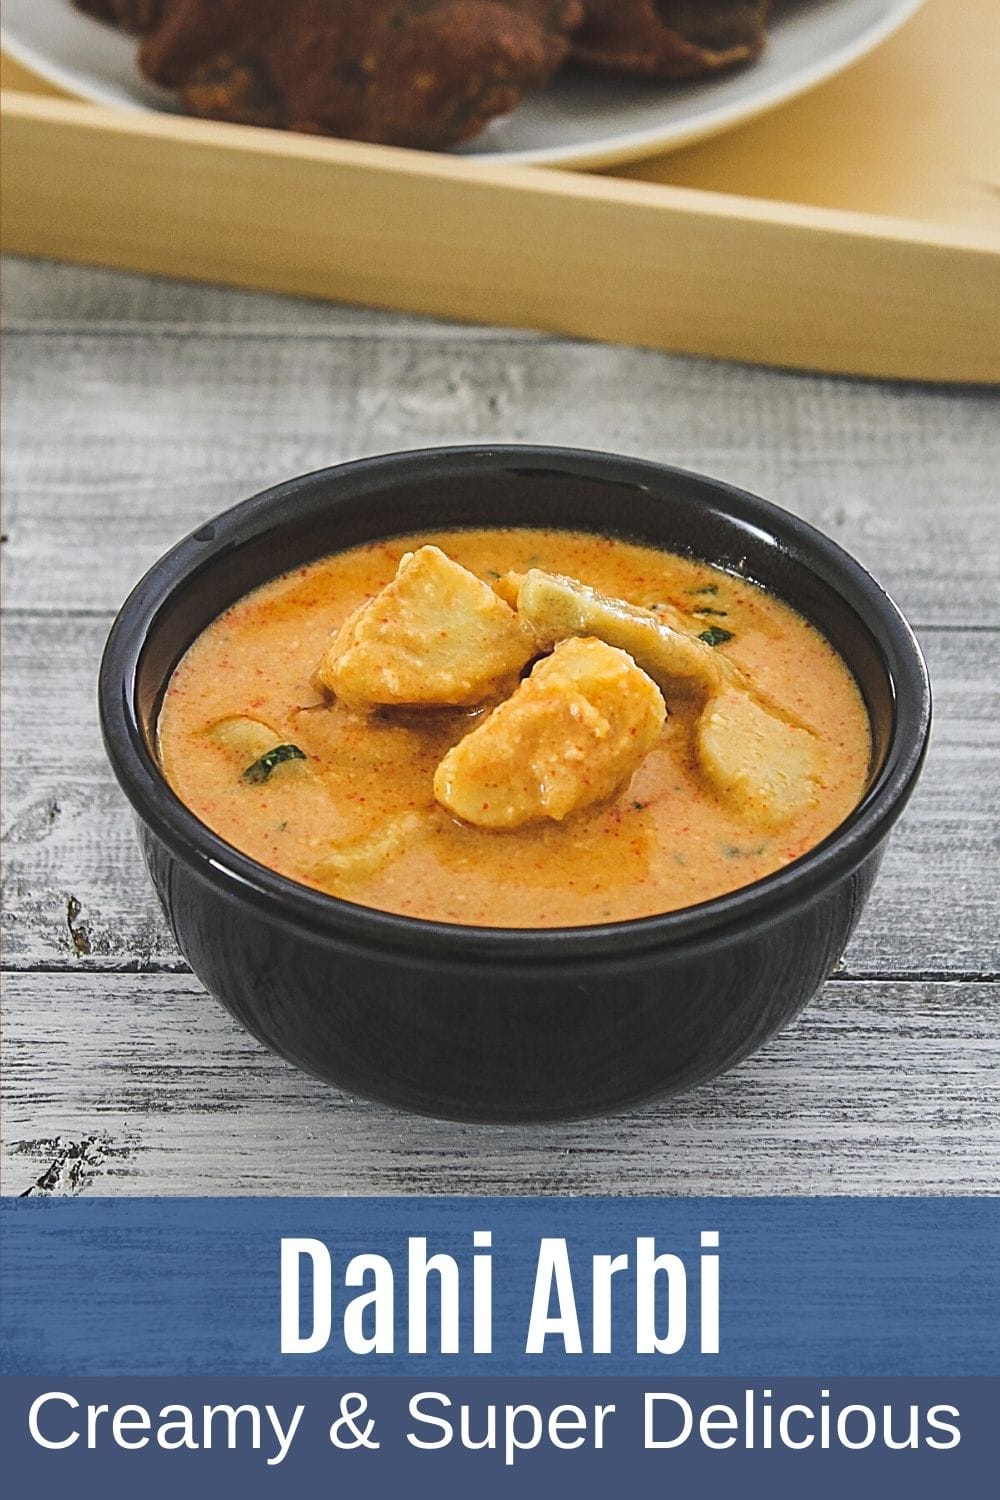 dahi arbi in a bowl with text on the image for pinterest